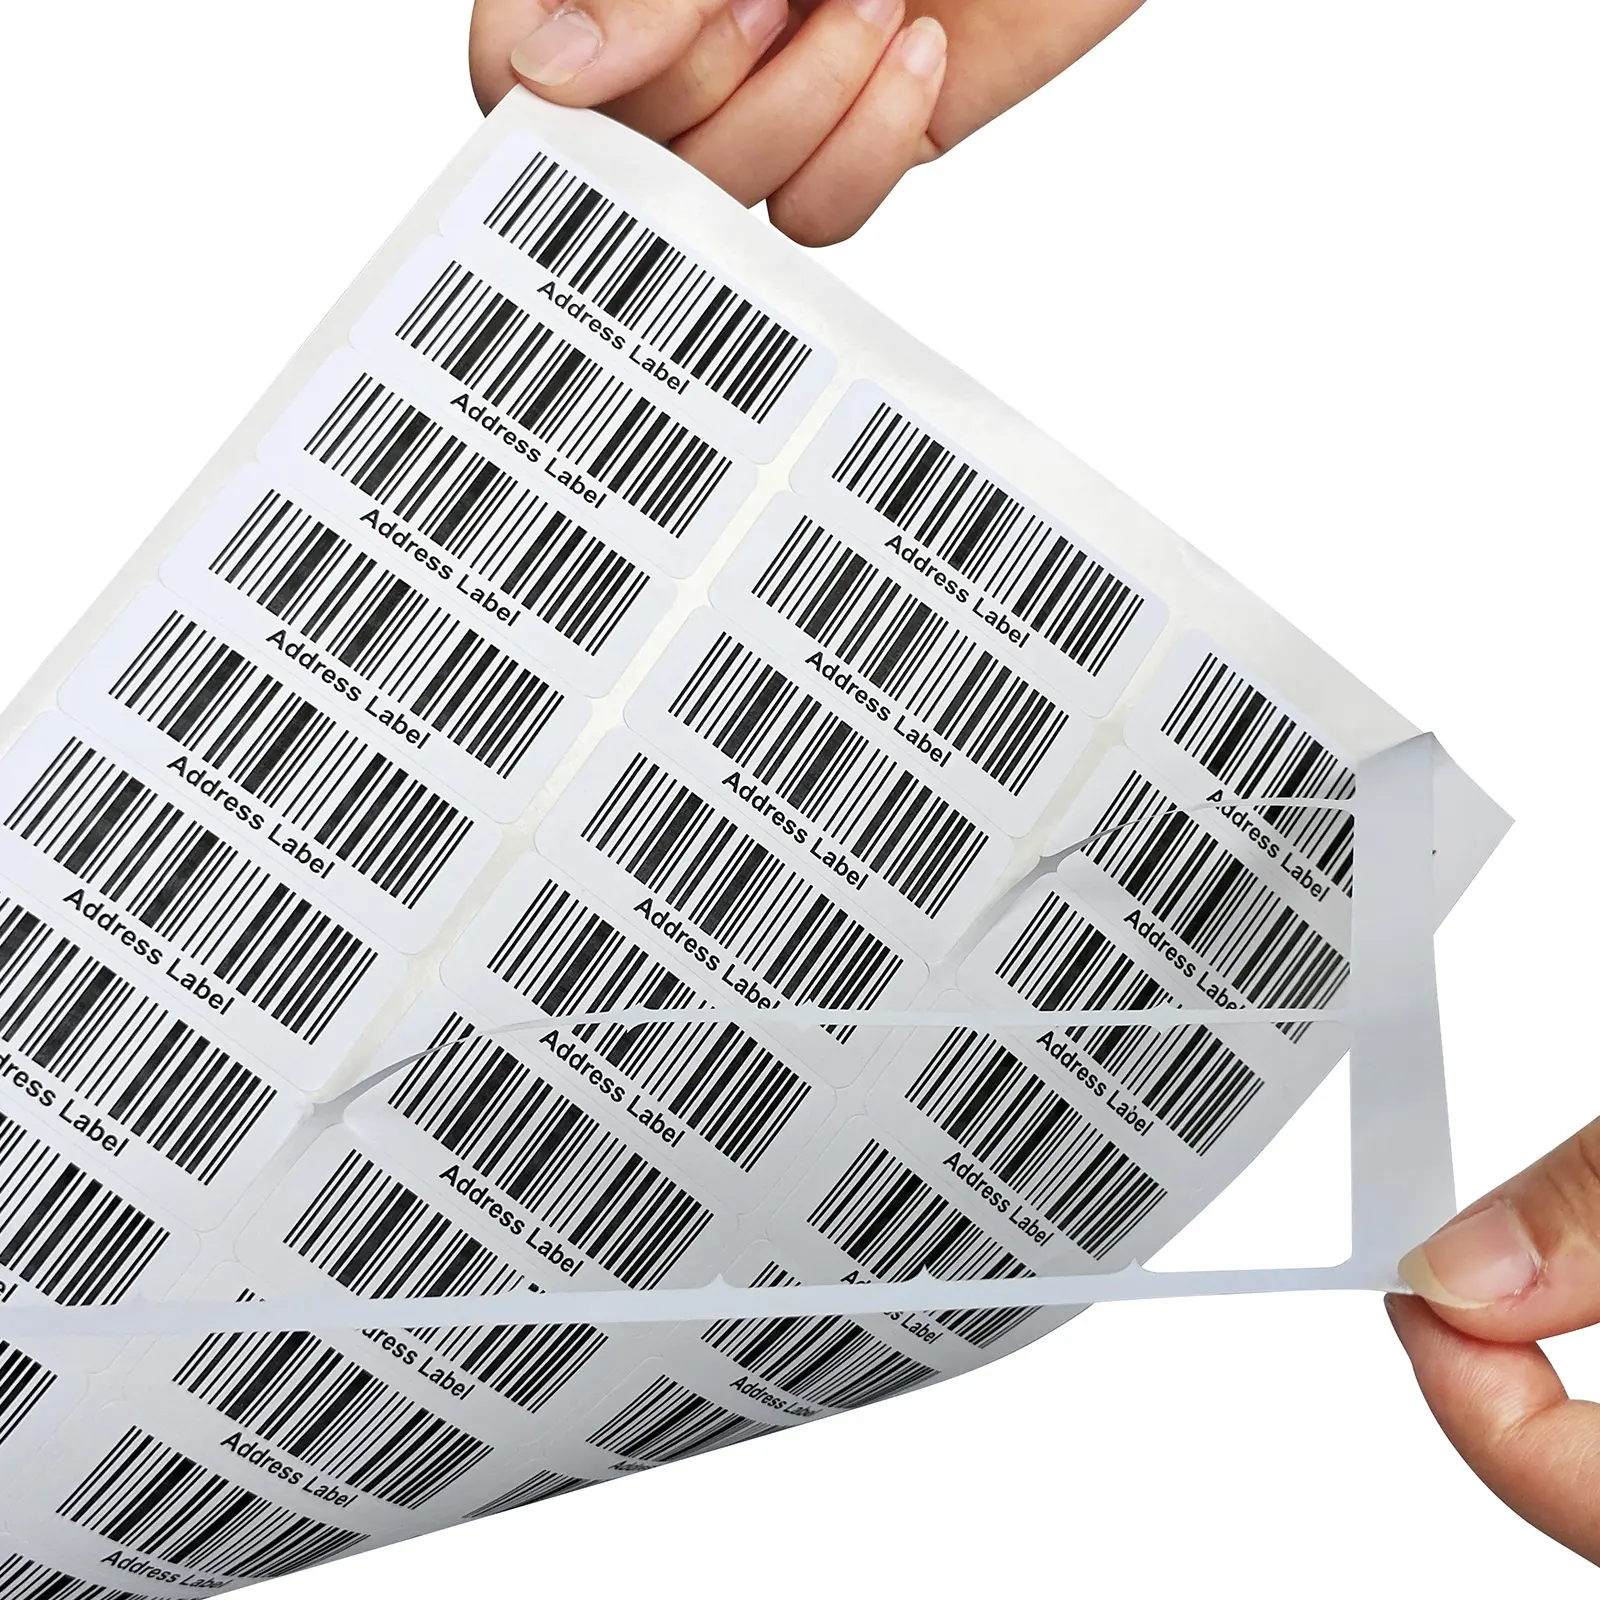 Factory Price A4 Sheet Adhesive Address Labels 30 Up Barcode Feature for Laser & Inkjet Printer Packages Shipping Labels